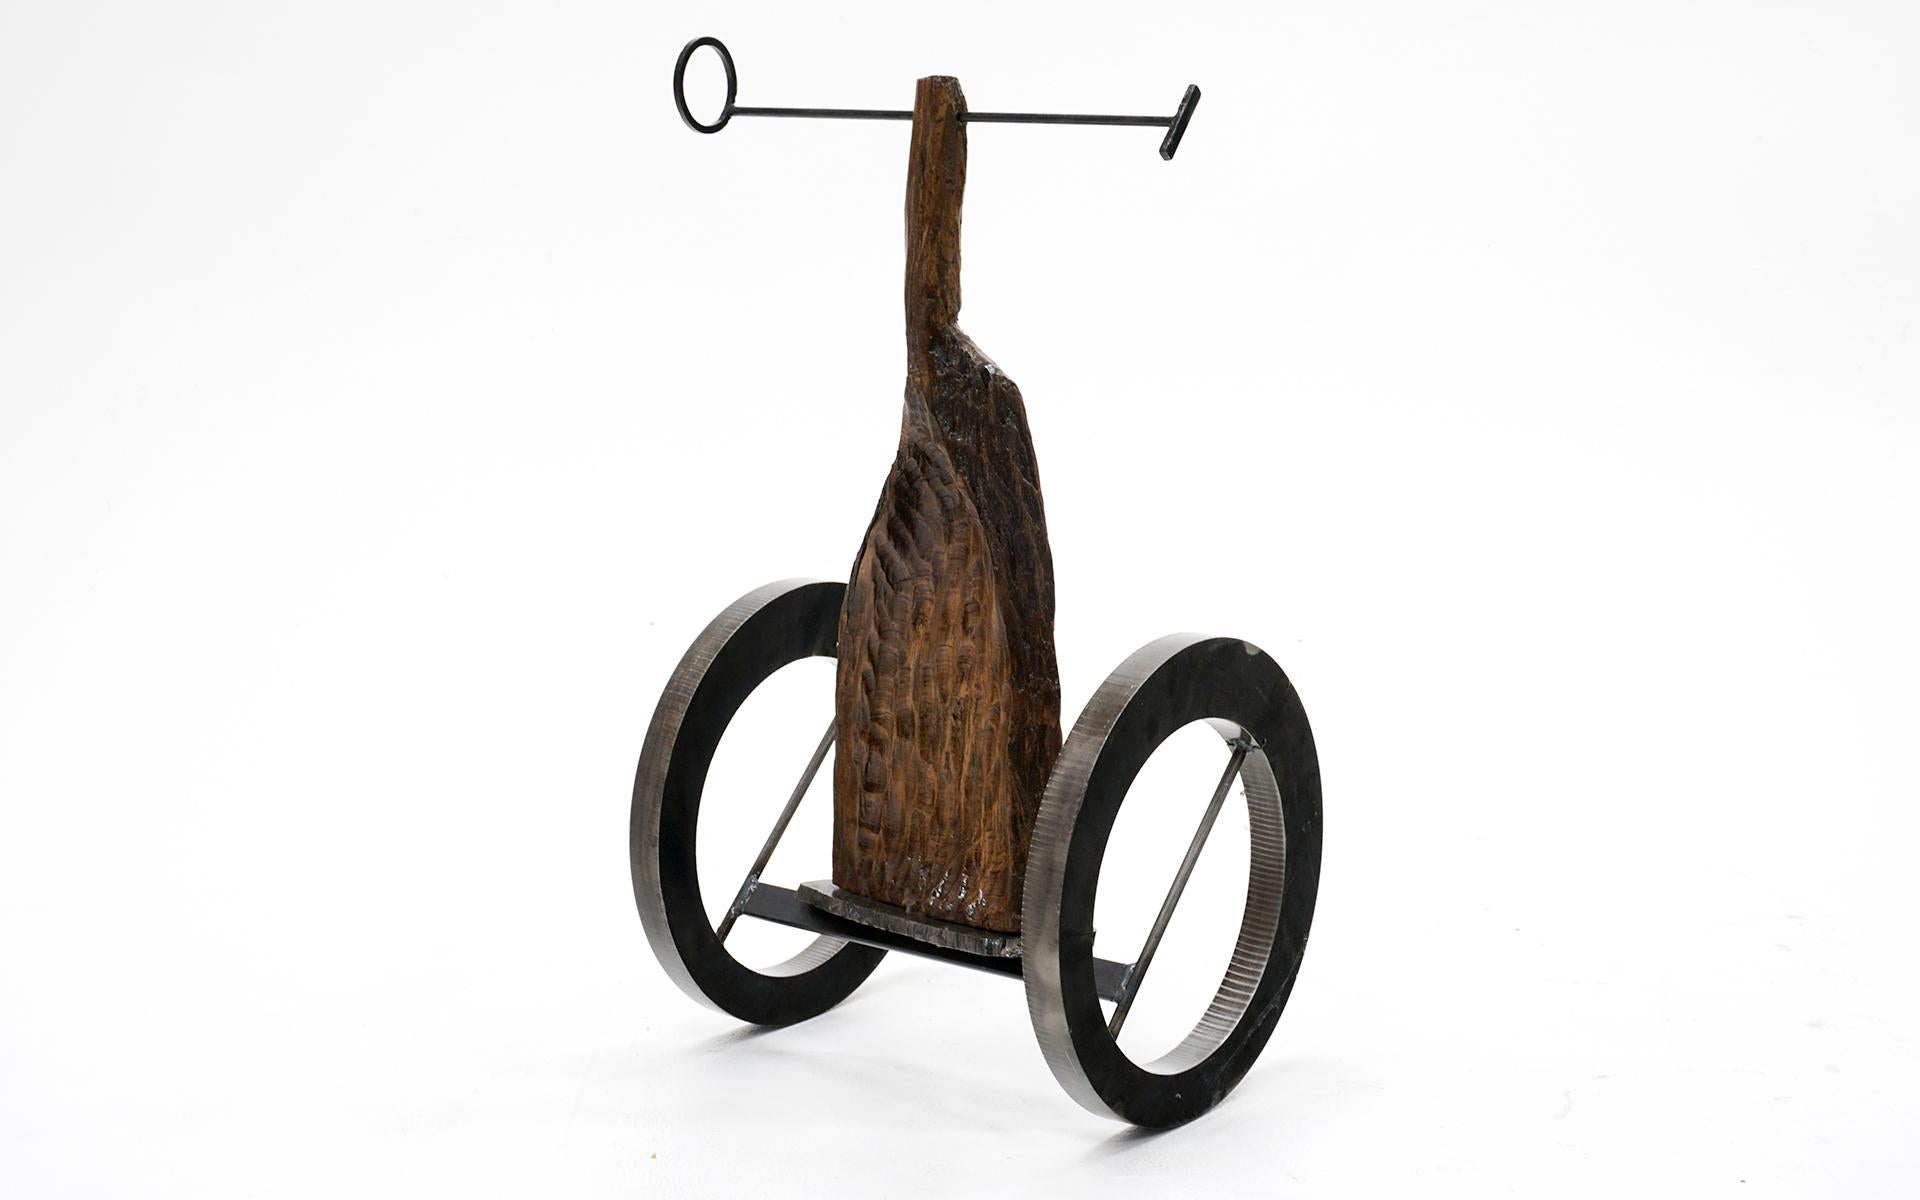 The Chariot by Dave Root is a kinetic piece that is not quite kinetic. It is directly inspired by Alberto Giacometti’s Le Chariot but interpreted on an asymmetrical plane in a non-figurative universe. In this iteration the chariot is out of balance